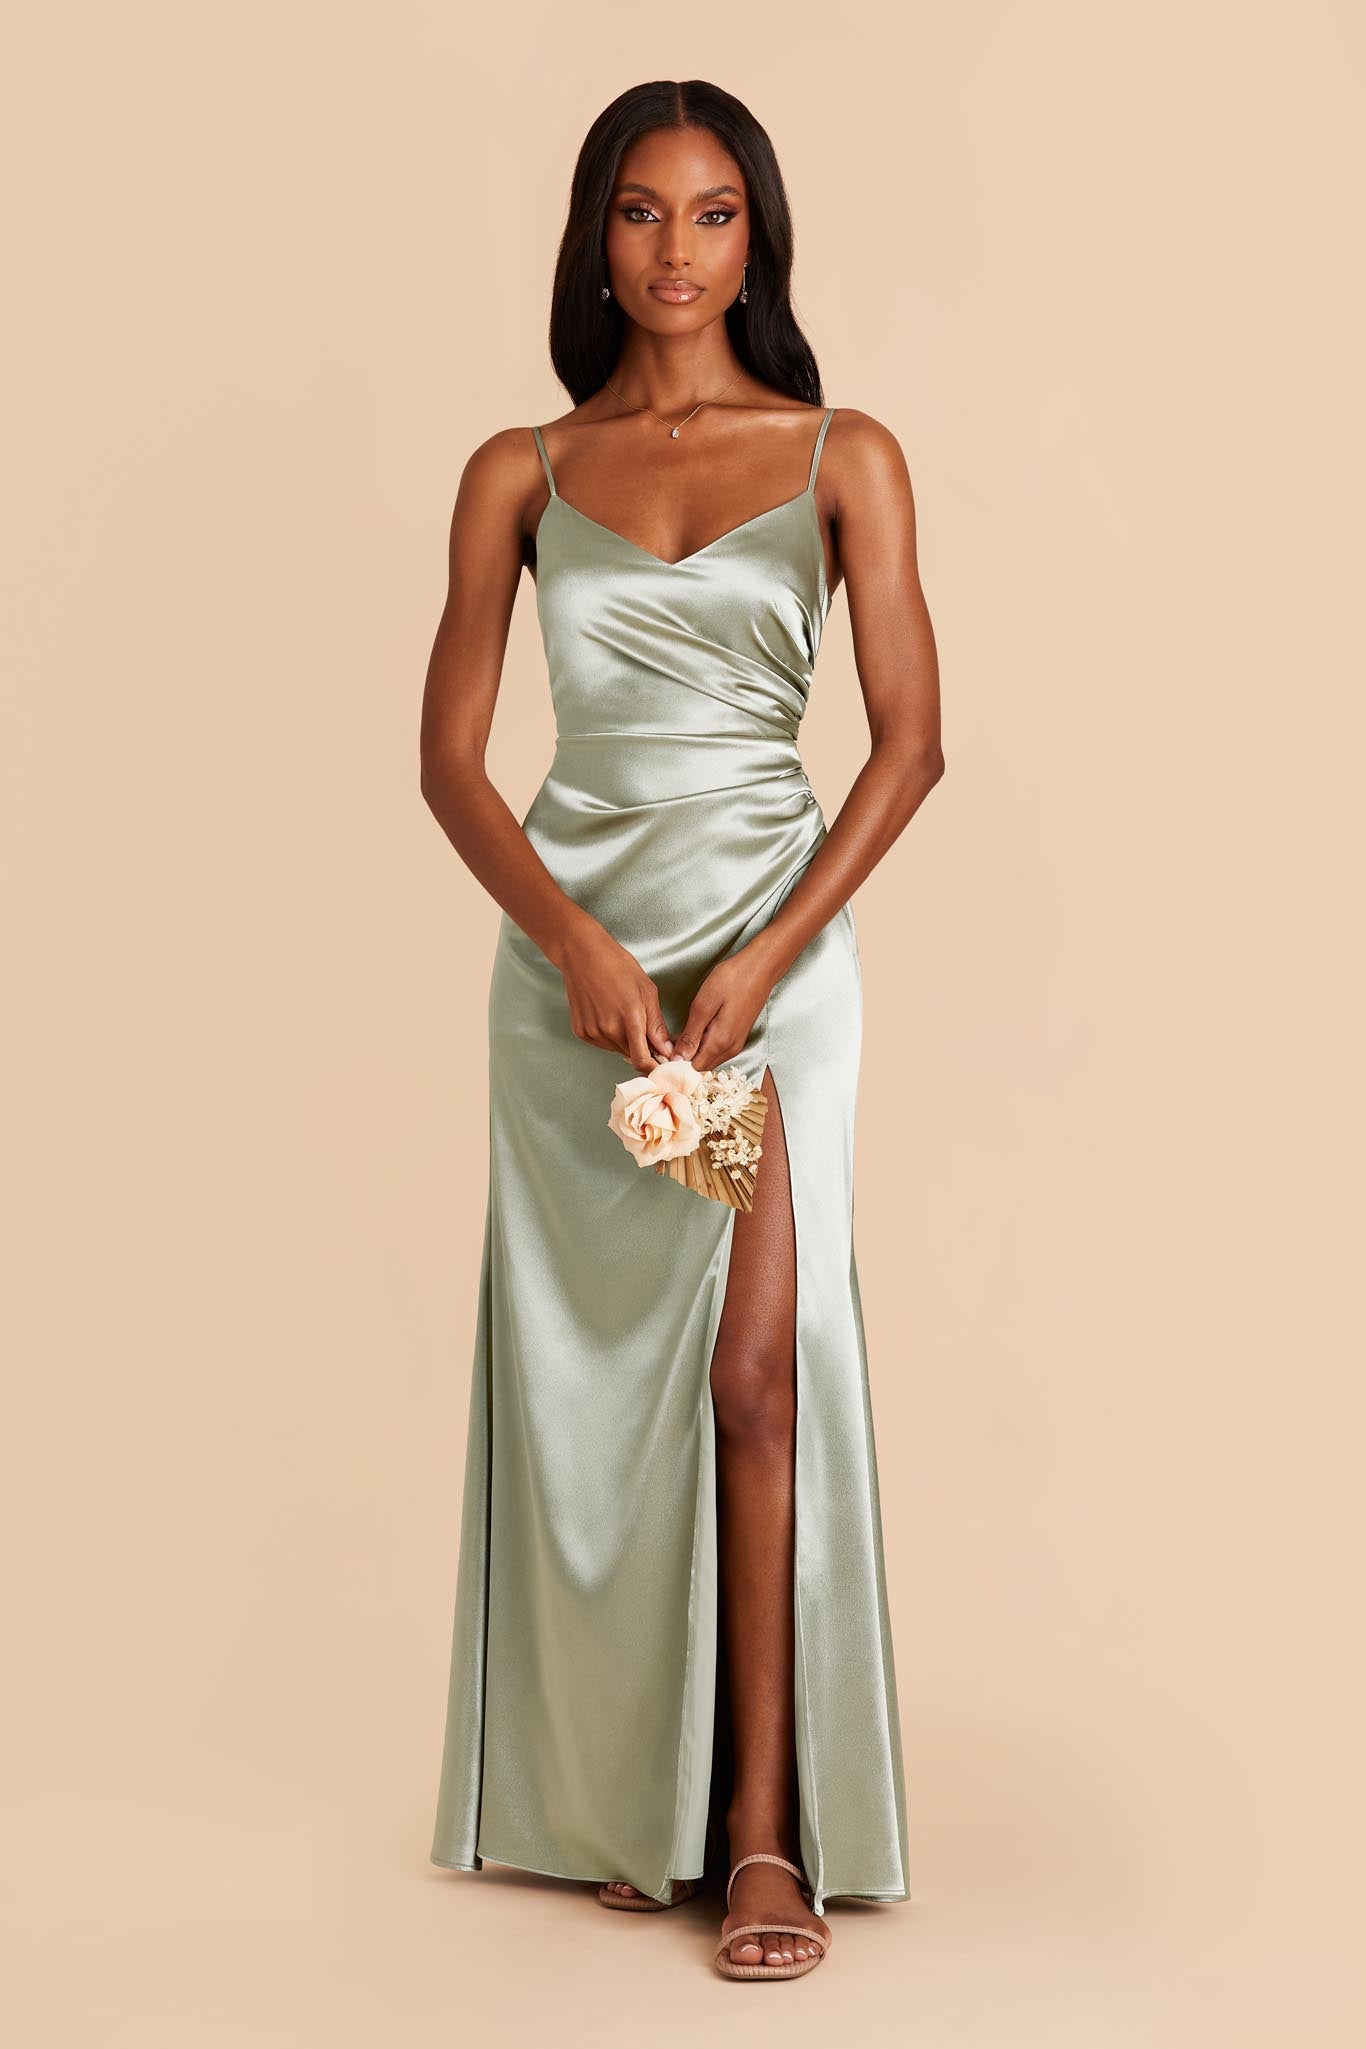 26 Satin Bridesmaids Dresses That Your Girls Will Adore - hitched.co.uk -  hitched.co.uk